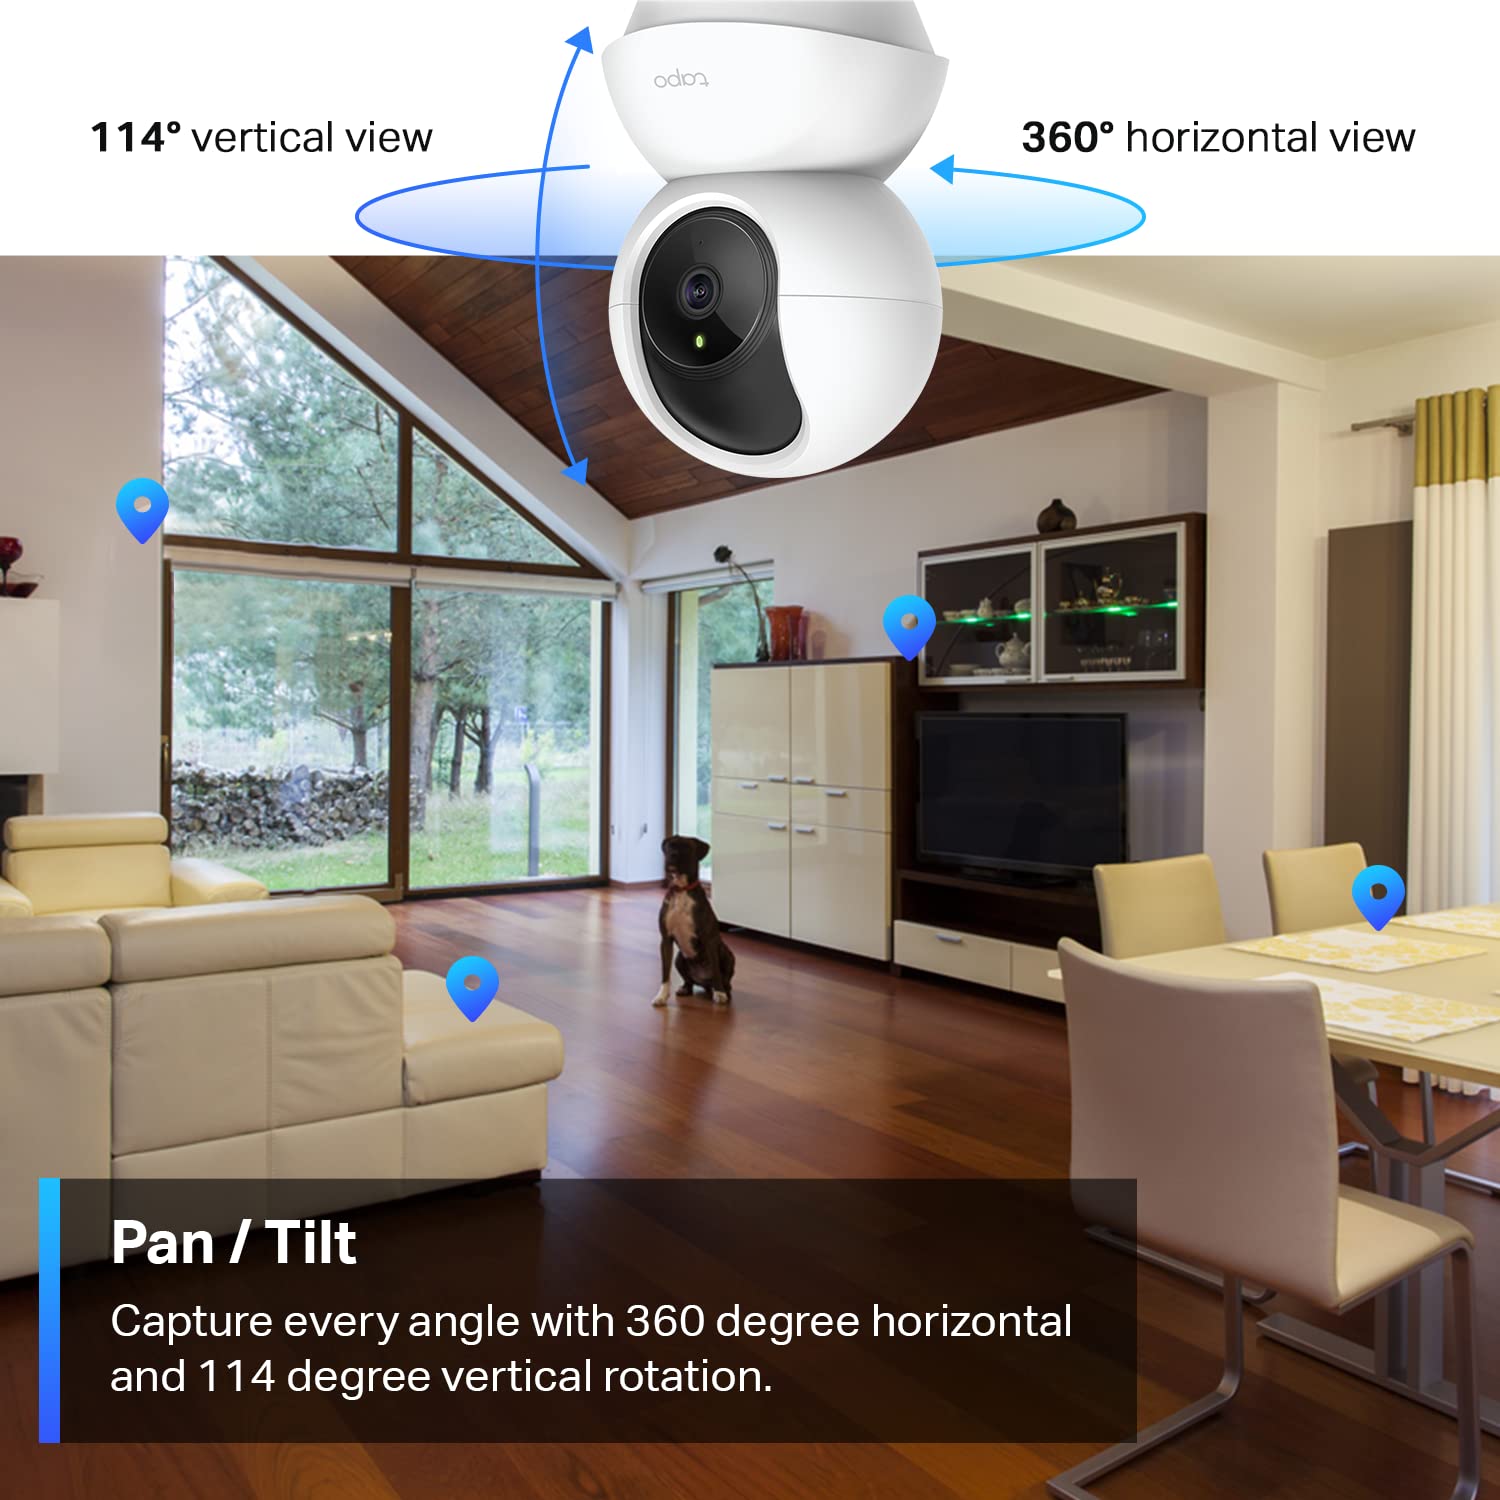 TP-LINK Tapo C200 Pan/tilt Home Security Wi-fi Camera Full HD 1080p Night  Vision for sale online